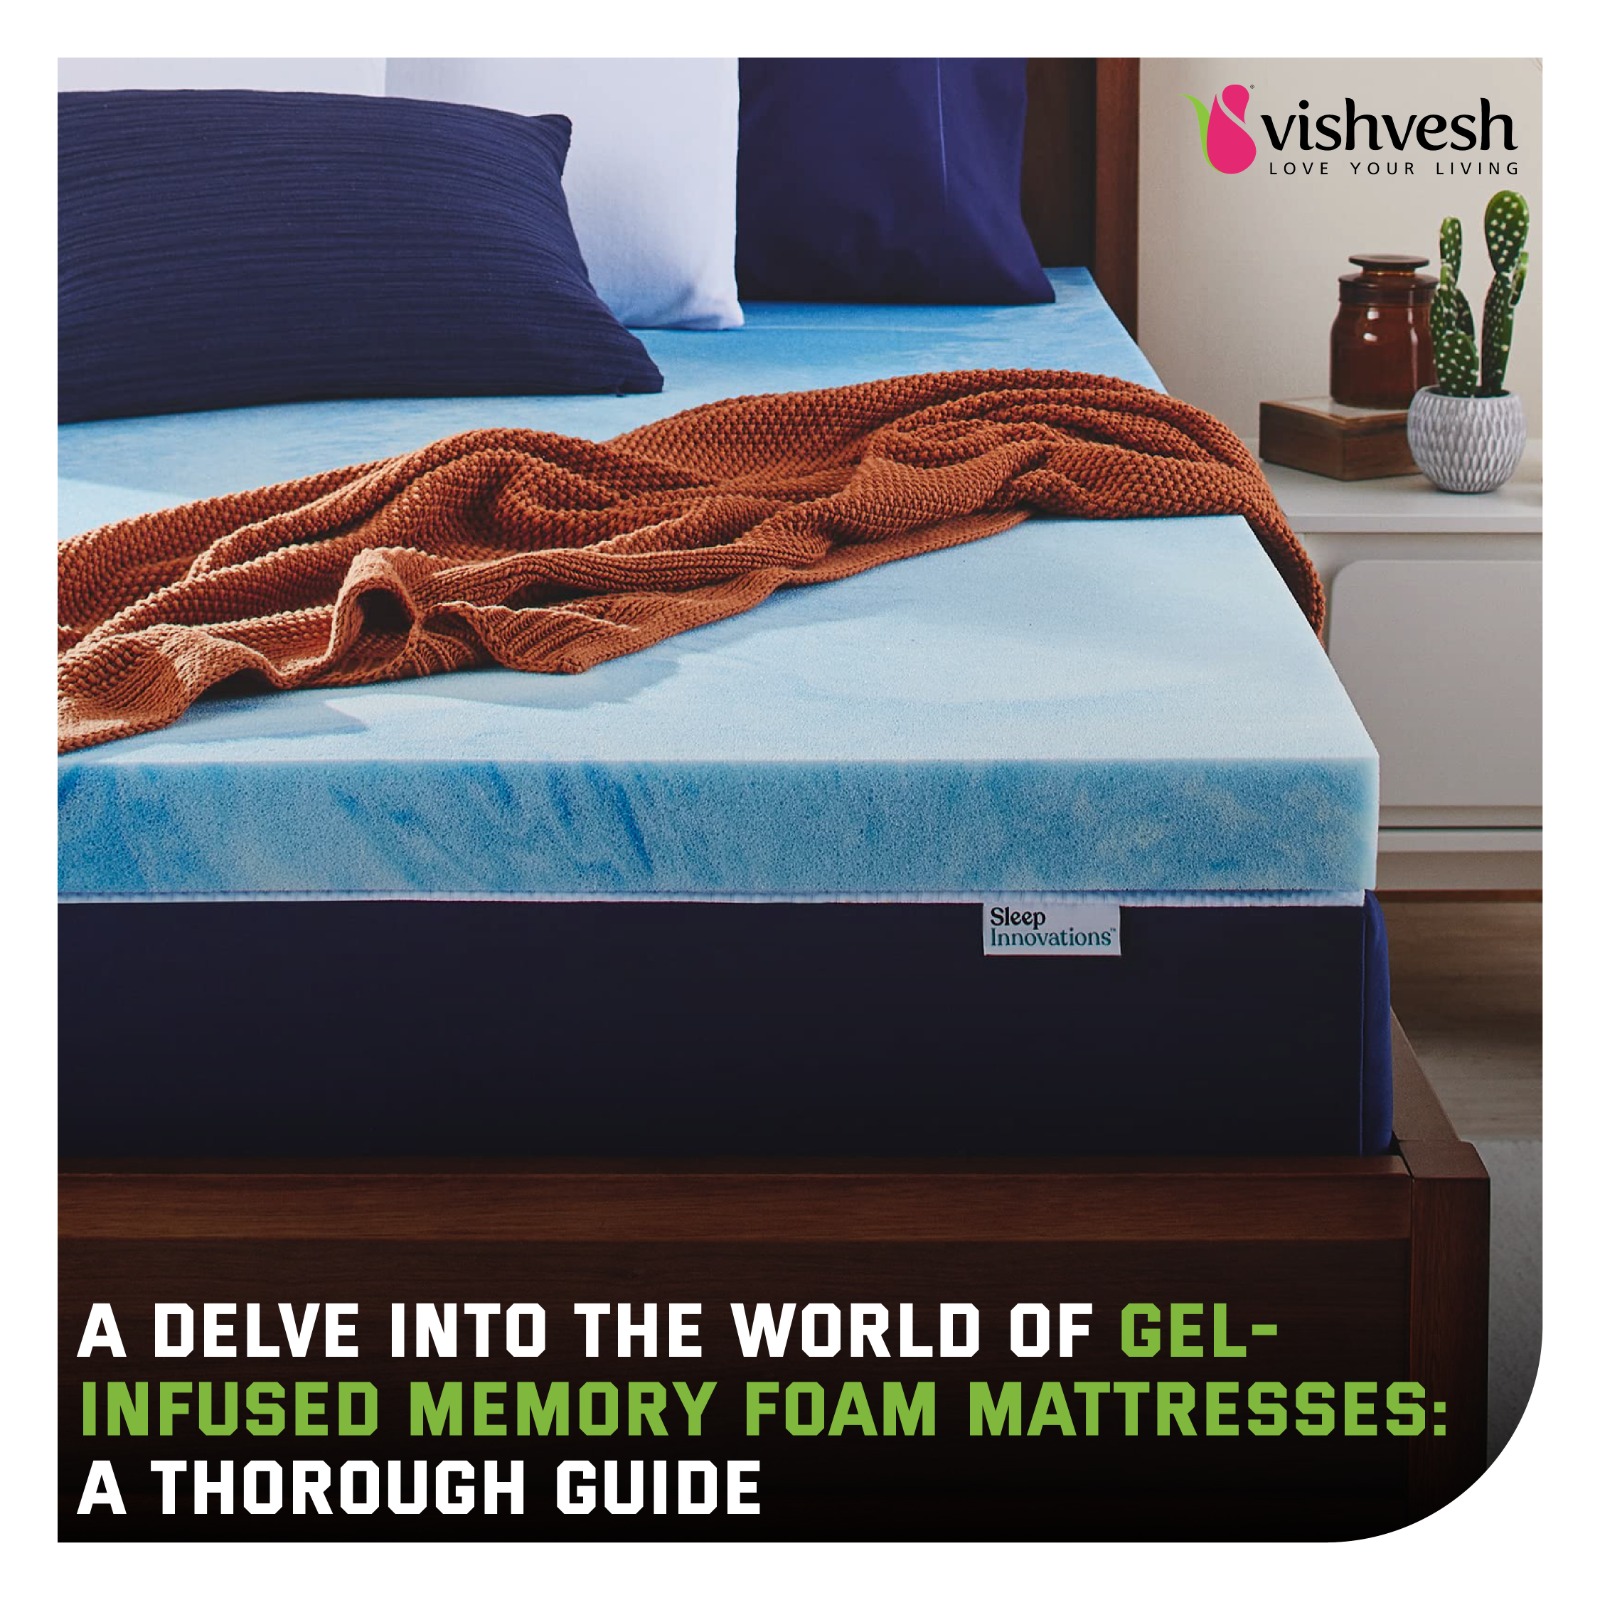 A-Delve-into-the-World-of-Gel-Infused-Memory-Foam-Mattresses-A-Thorough-Guide